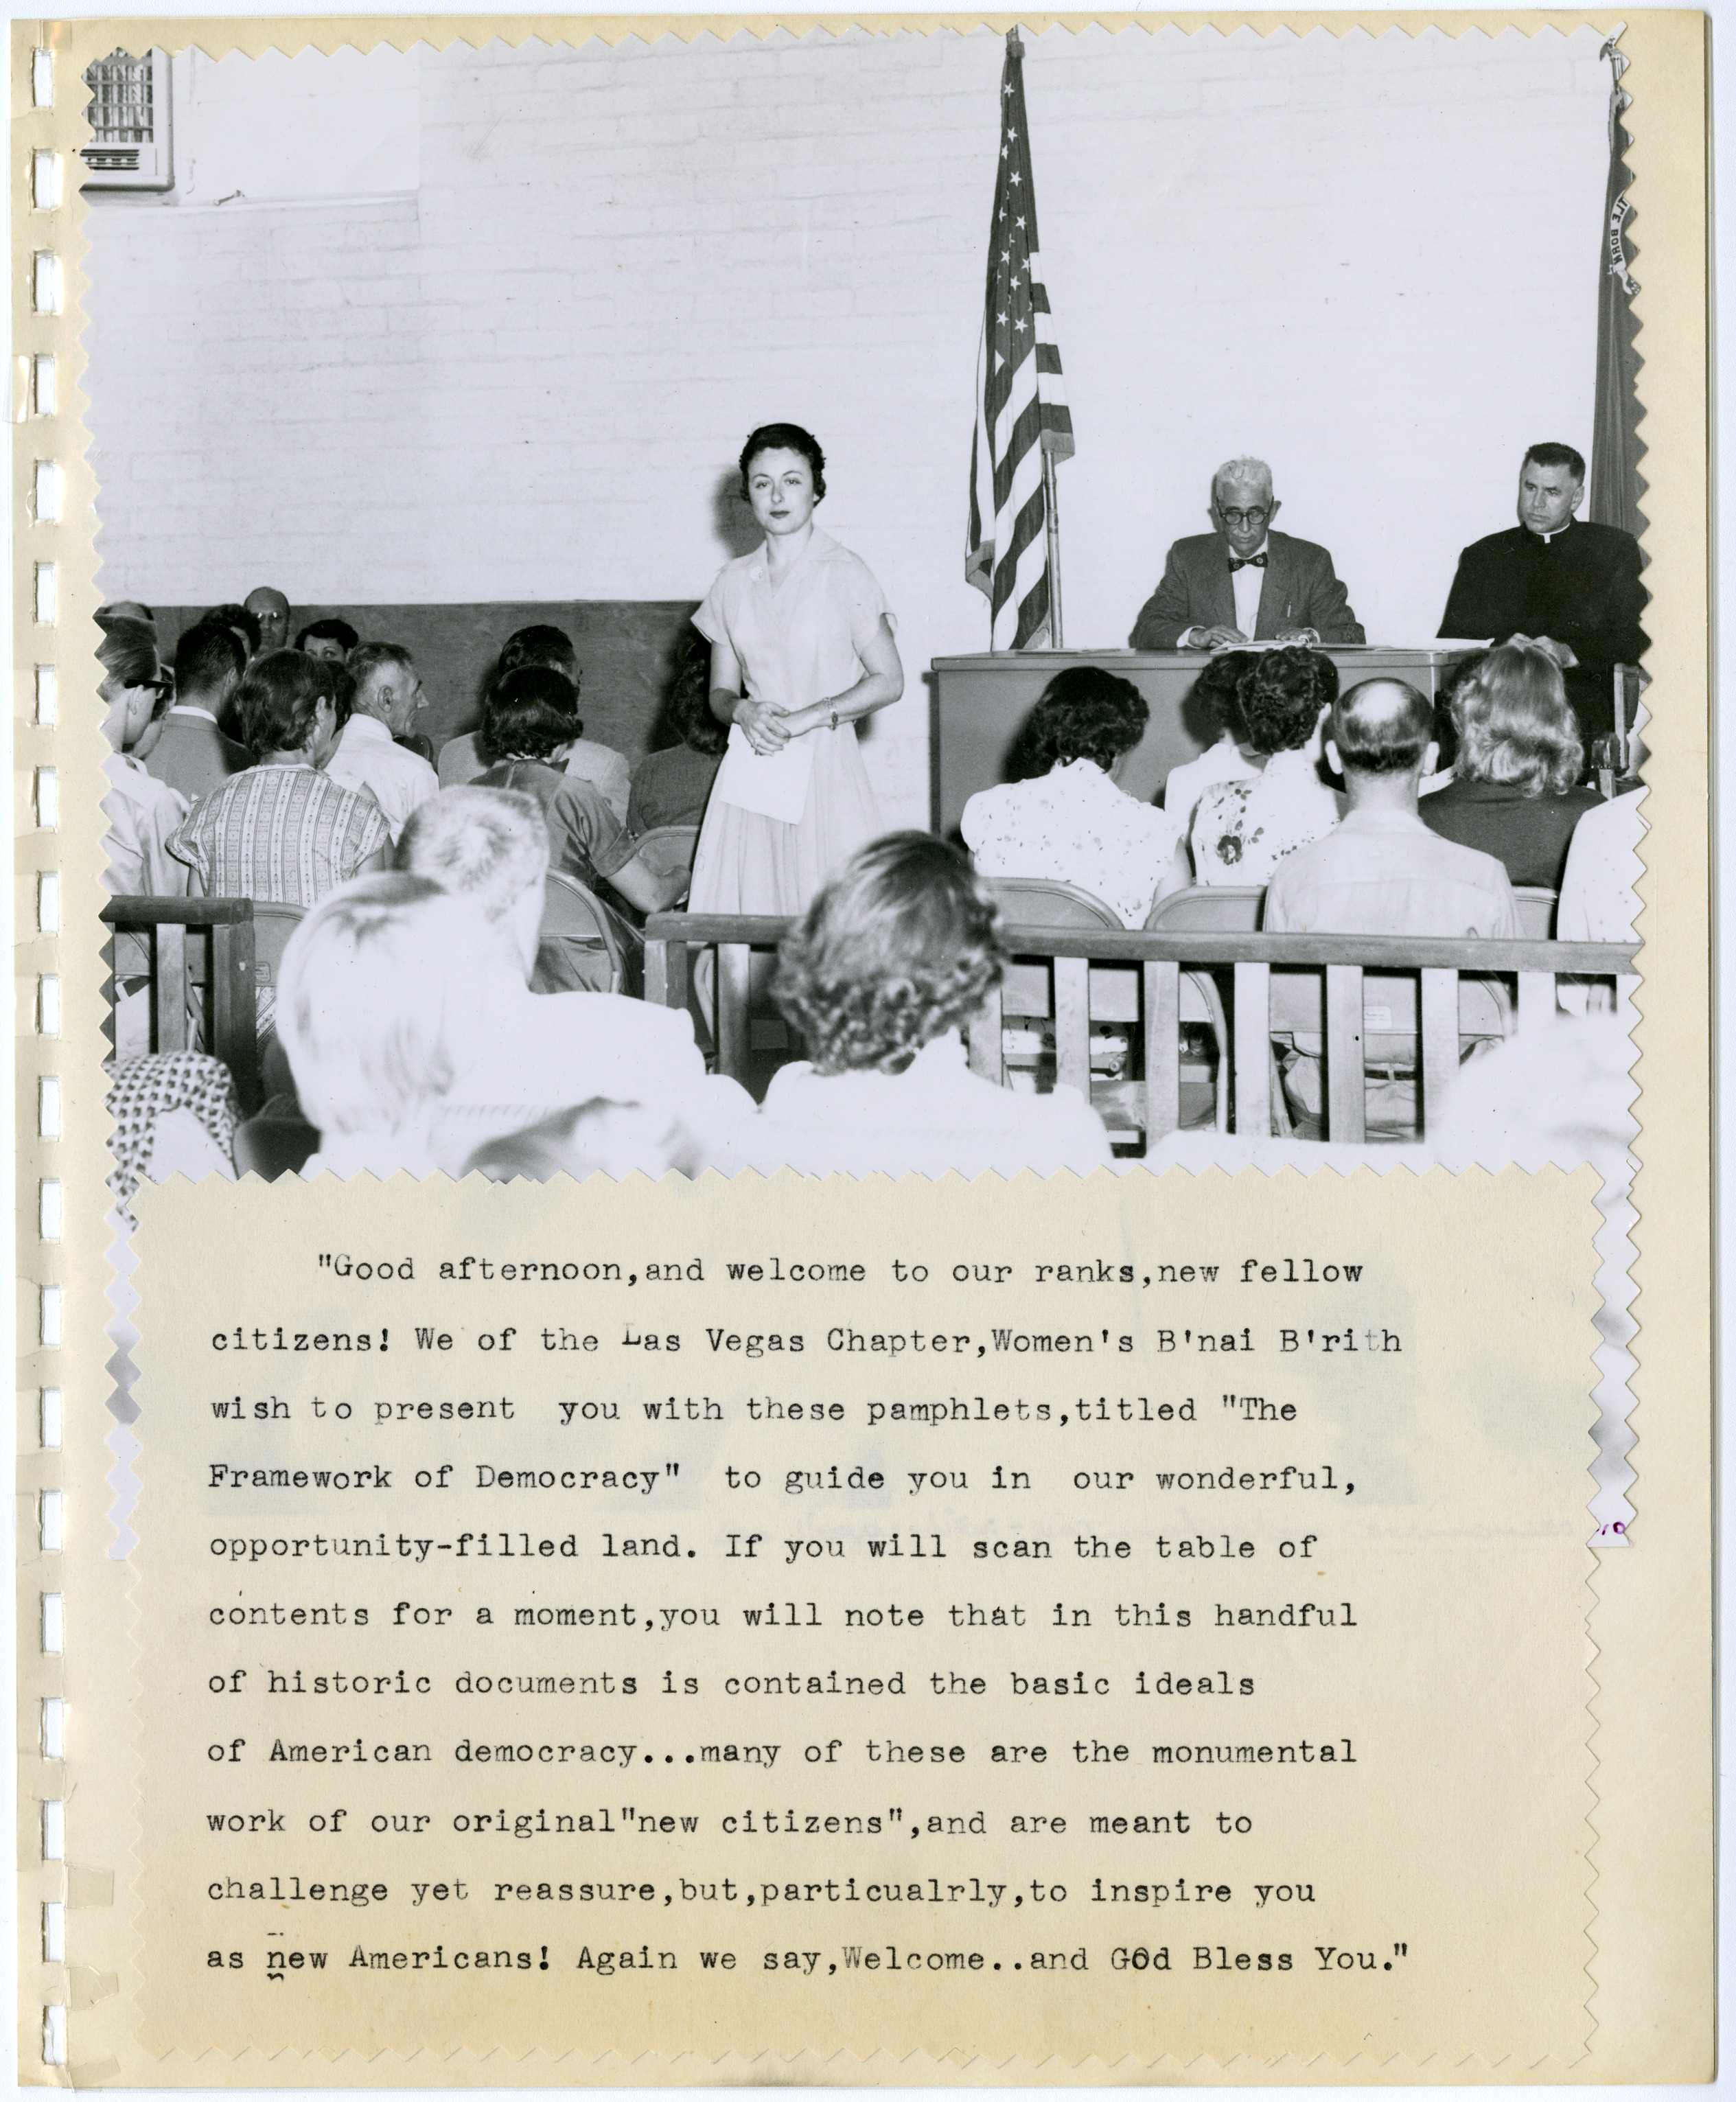 Album for the Americanism and Civic Affairs Committee of the Las Vegas B'nai B'rith Women, page 19